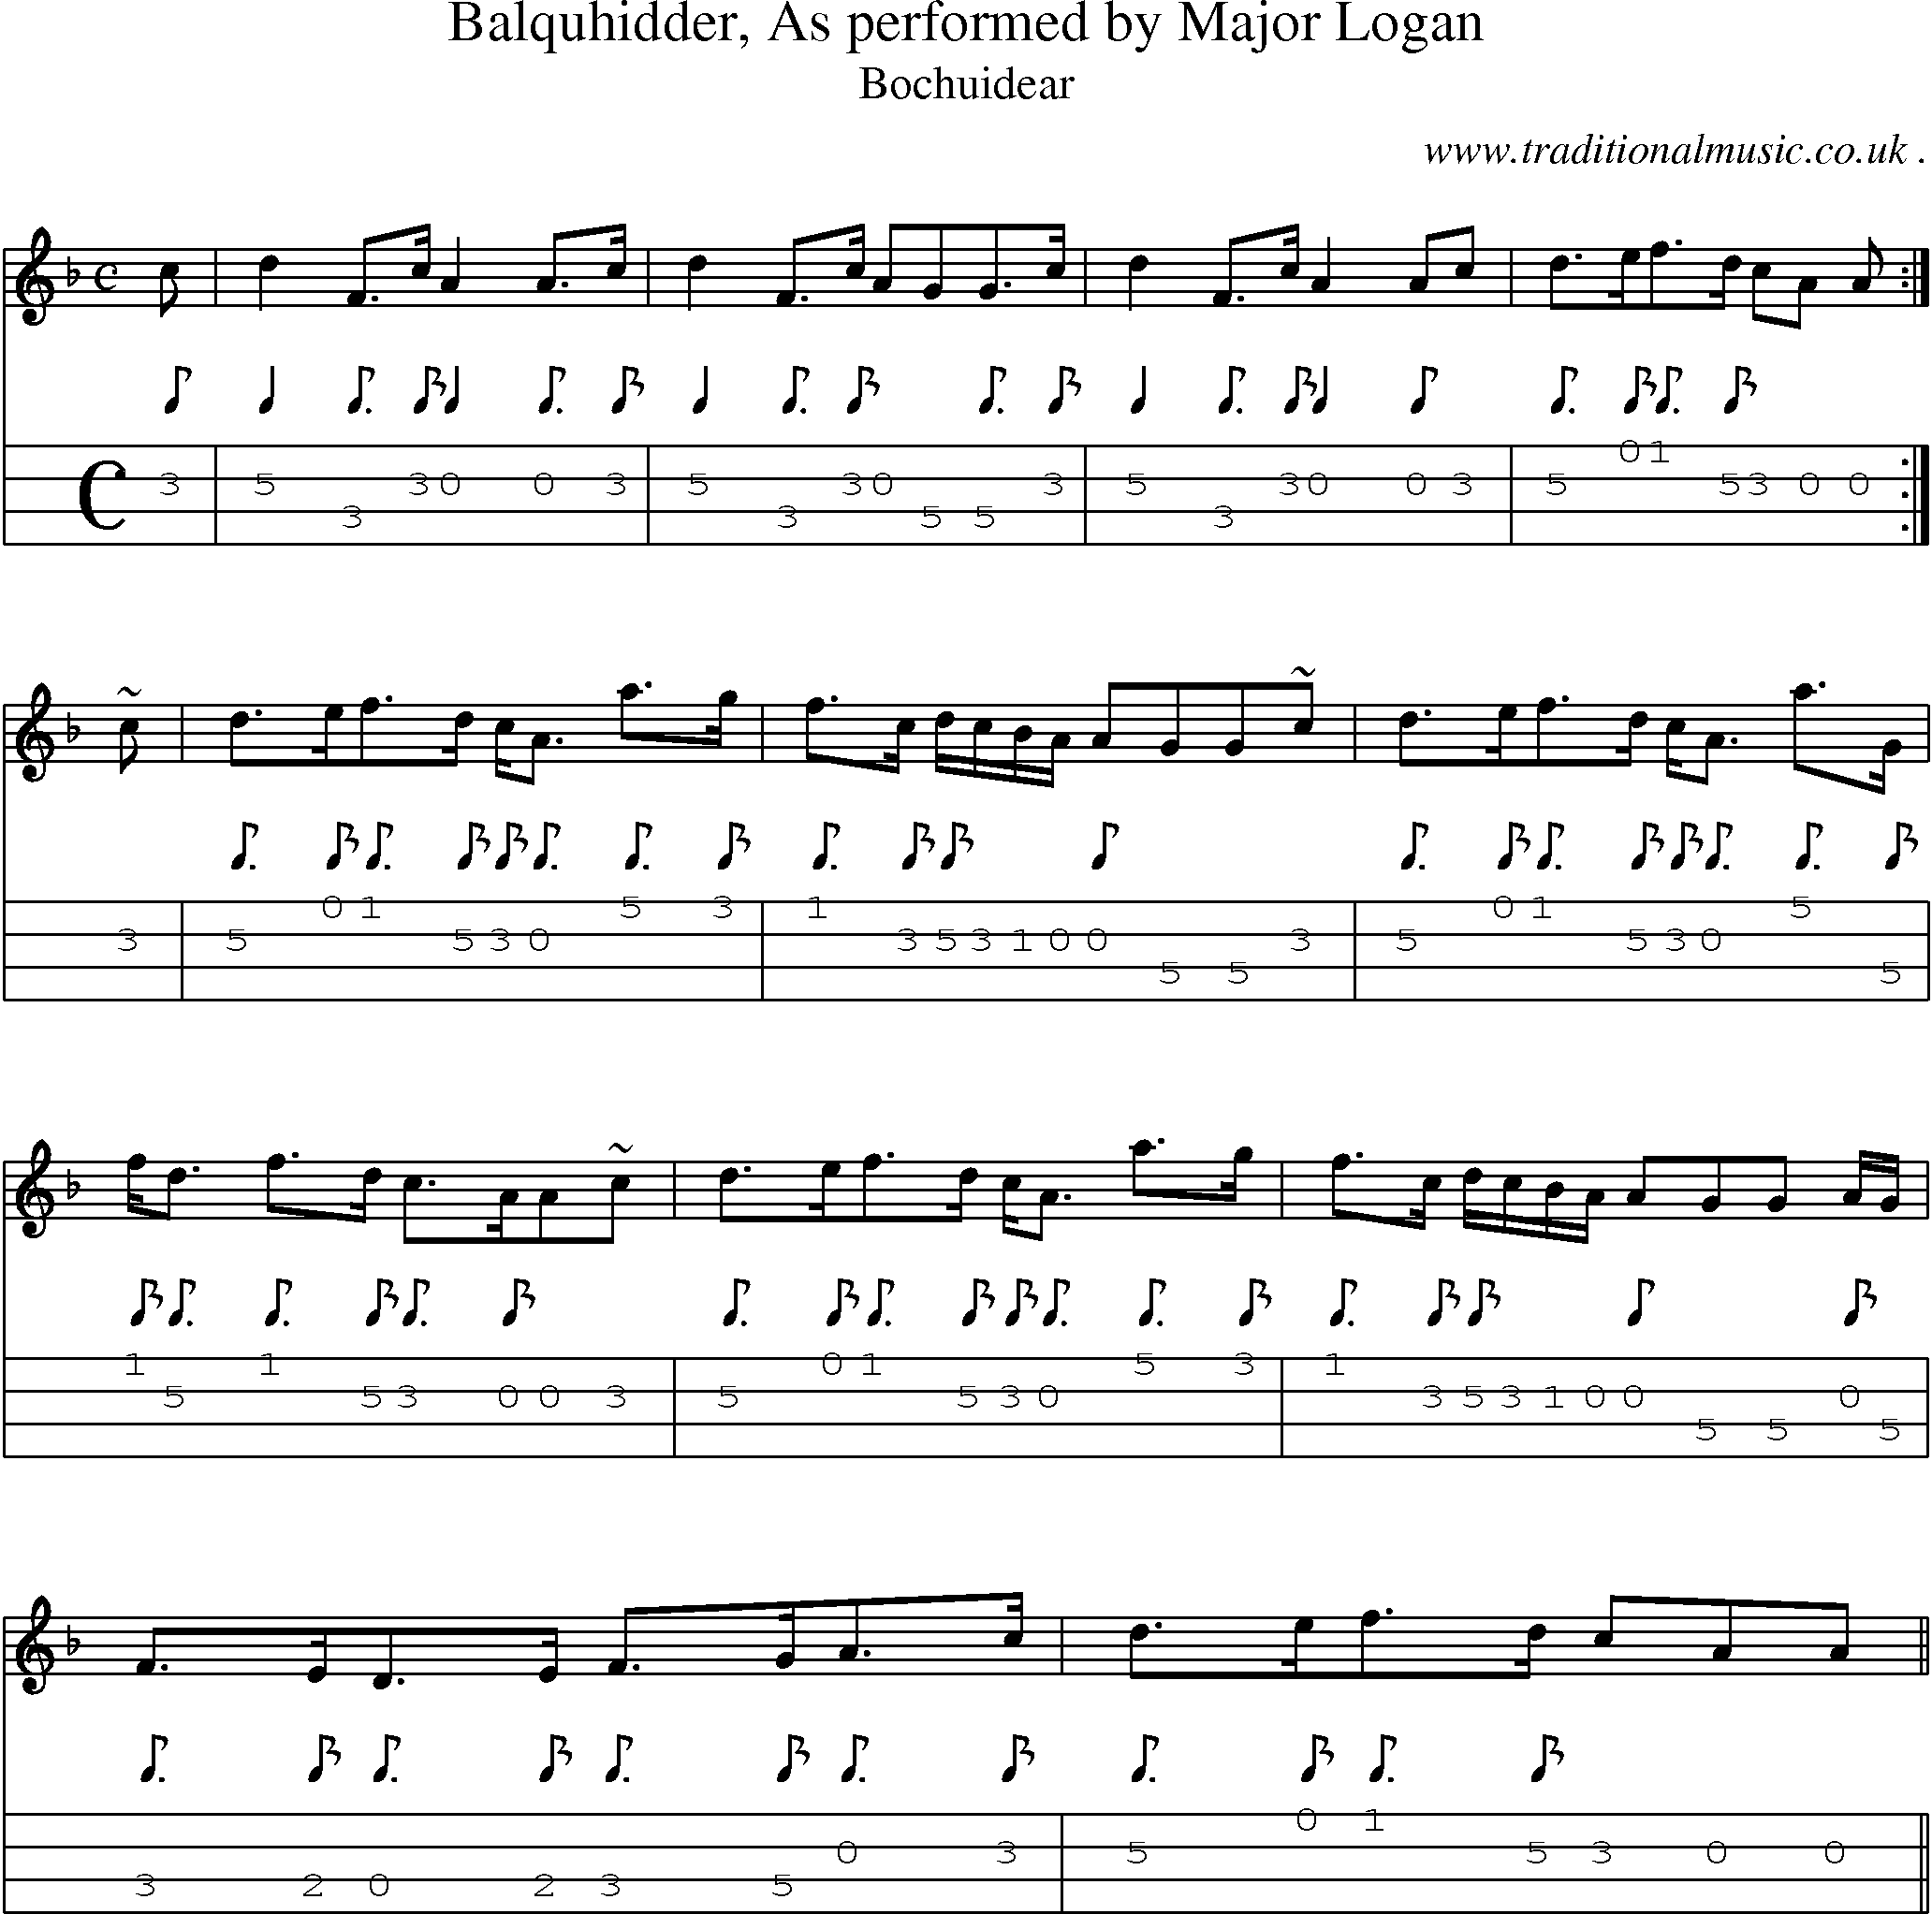 Sheet-music  score, Chords and Mandolin Tabs for Balquhidder As Performed By Major Logan